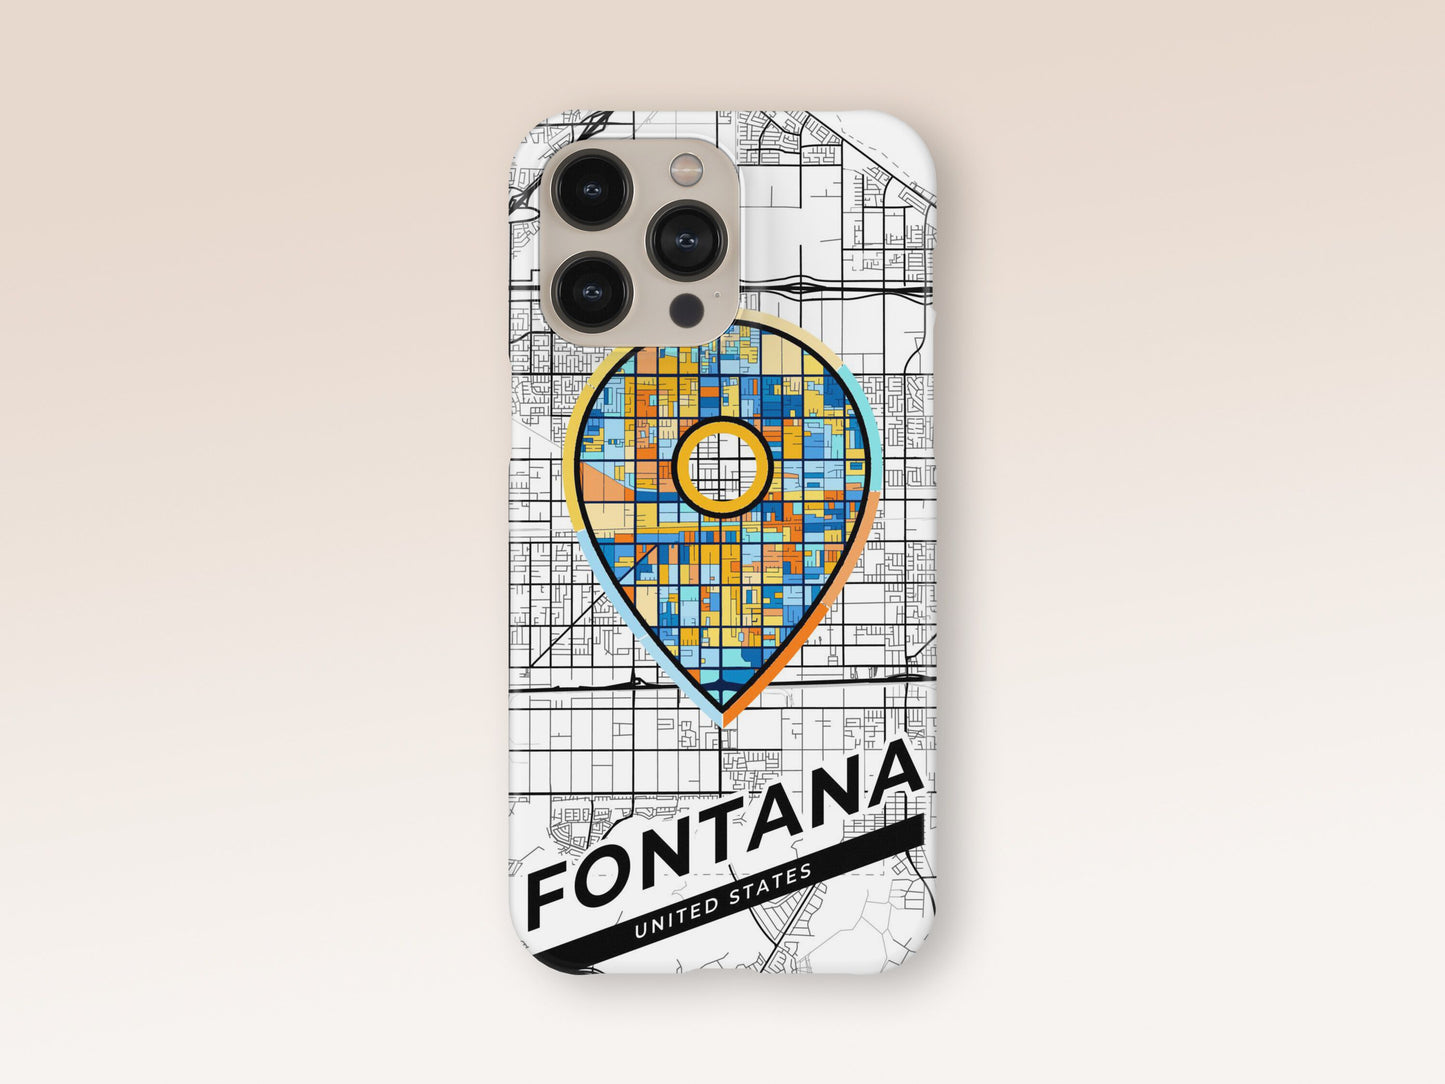 Fontana California slim phone case with colorful icon. Birthday, wedding or housewarming gift. Couple match cases. 1